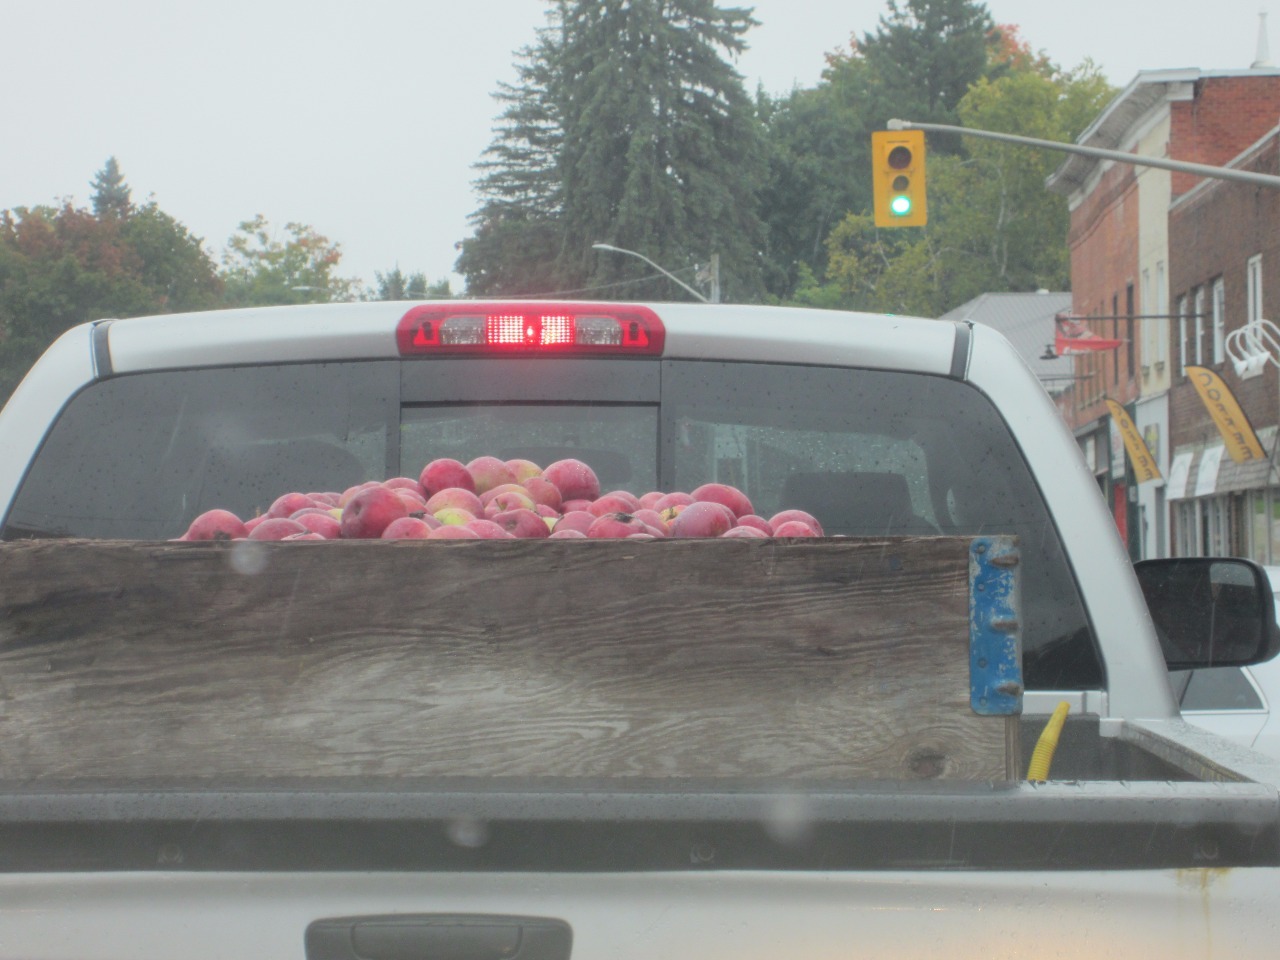 A Load of Apples headed to Market